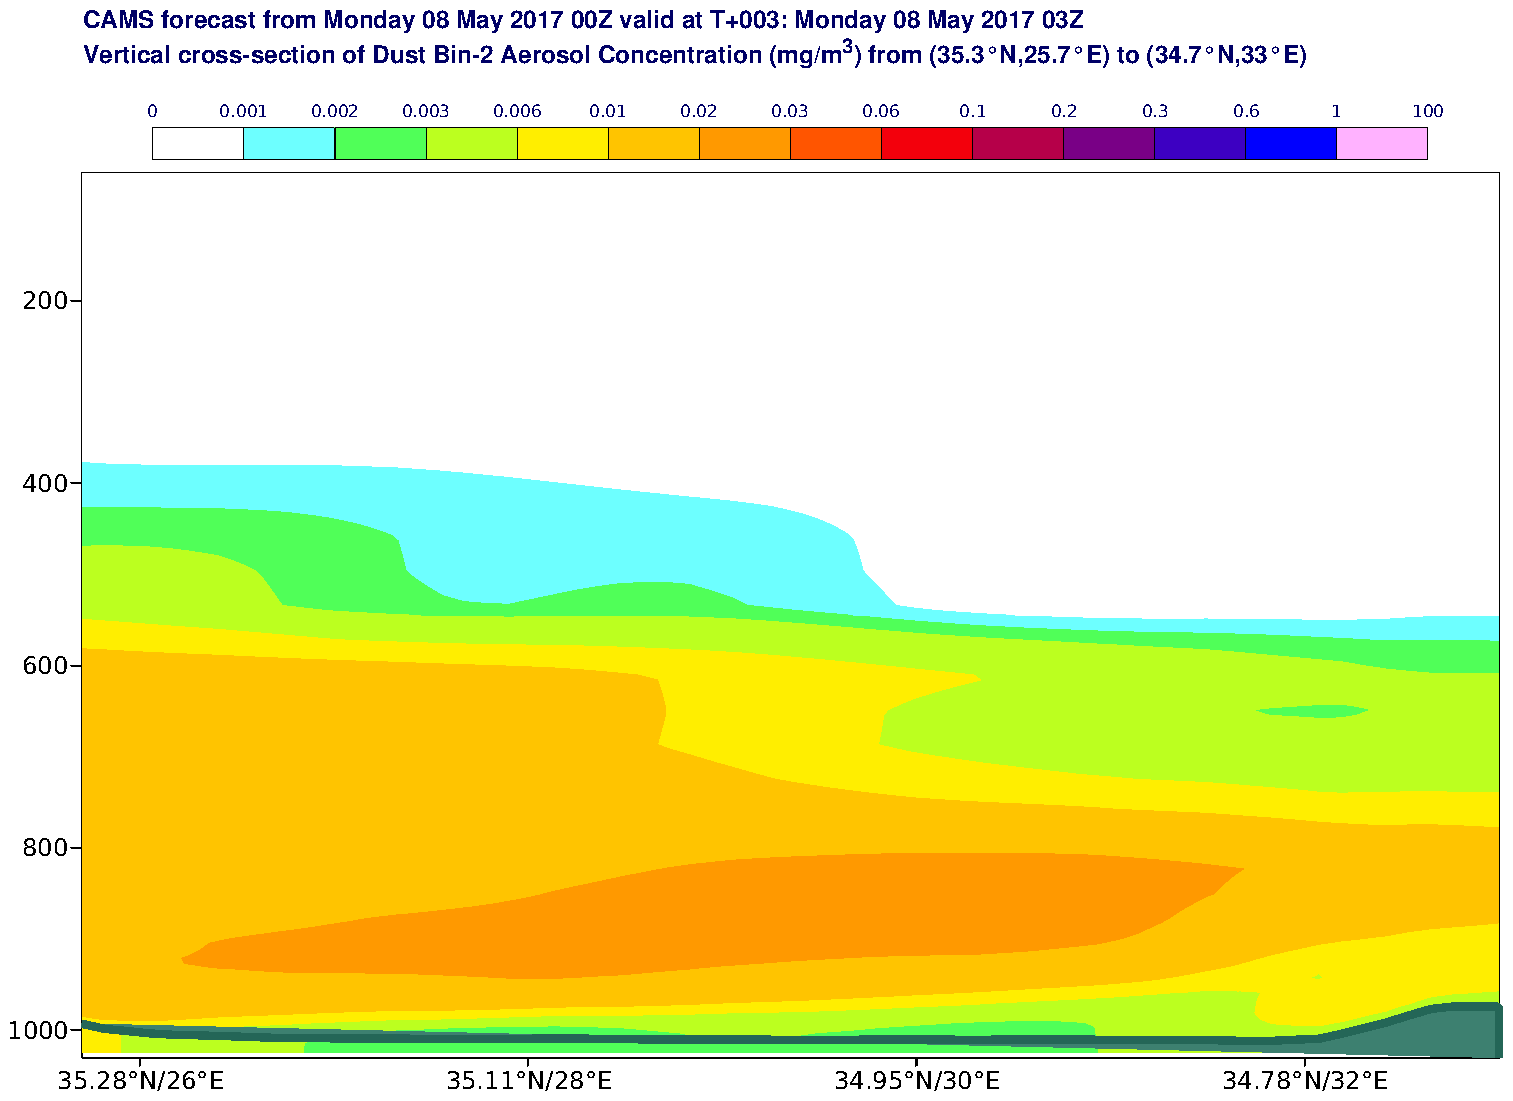 Vertical cross-section of Dust Bin-2 Aerosol Concentration (mg/m3) valid at T3 - 2017-05-08 03:00